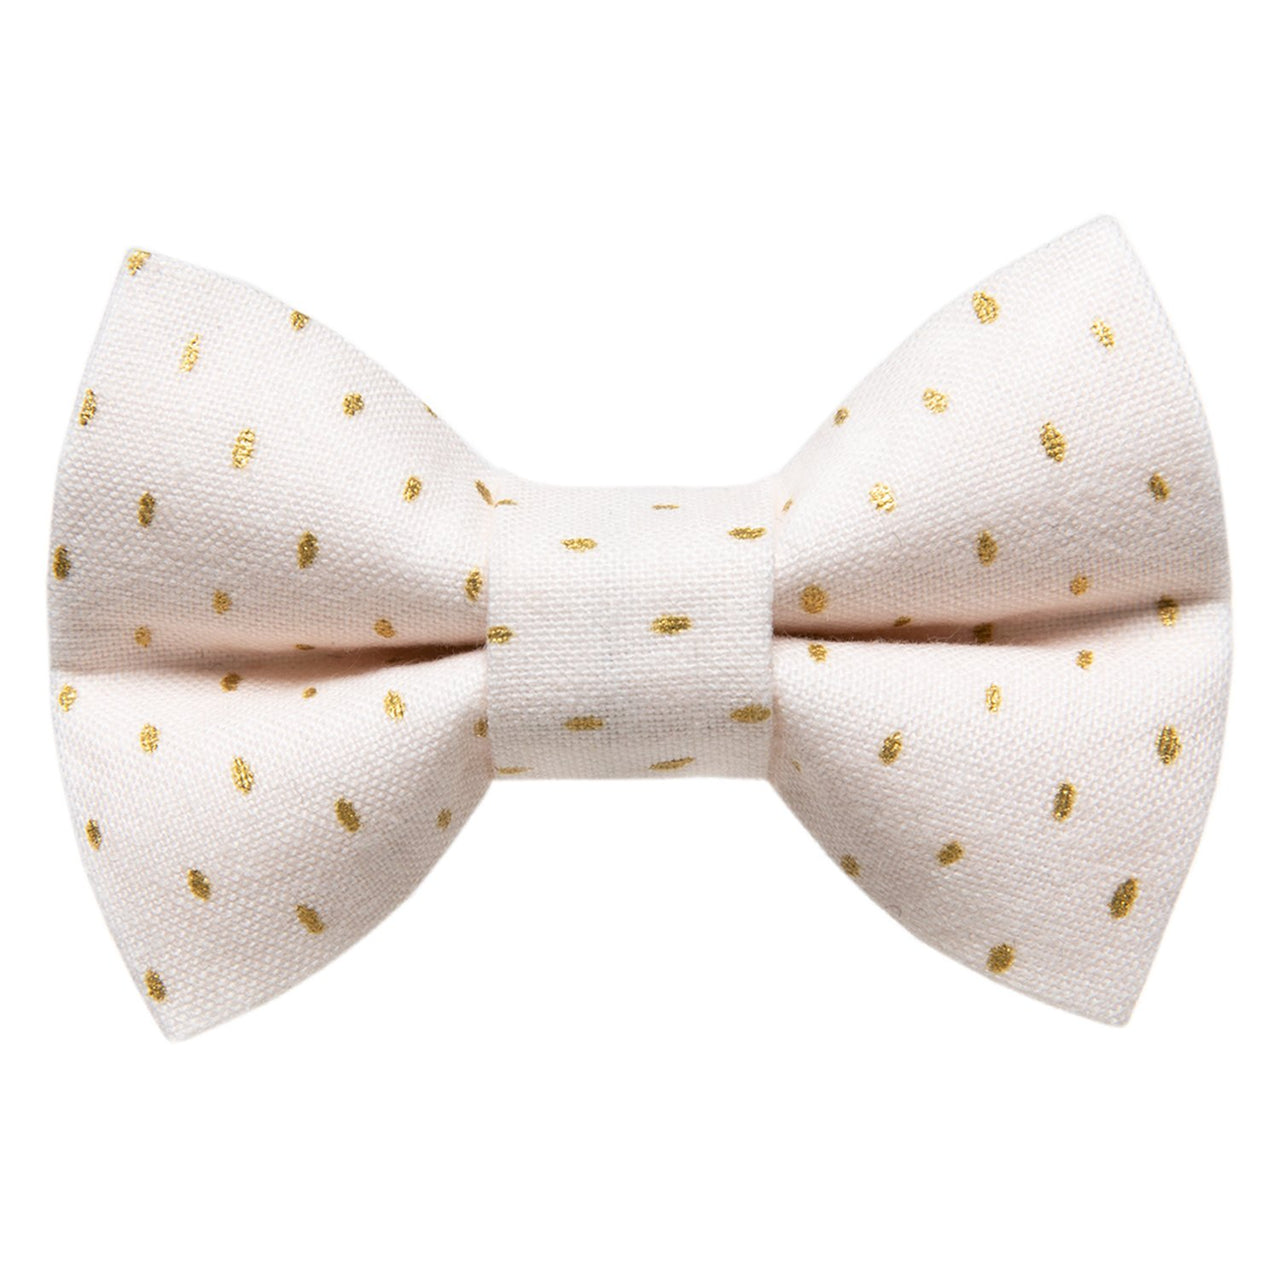 The Blushing - Cat / Dog Bow Tie